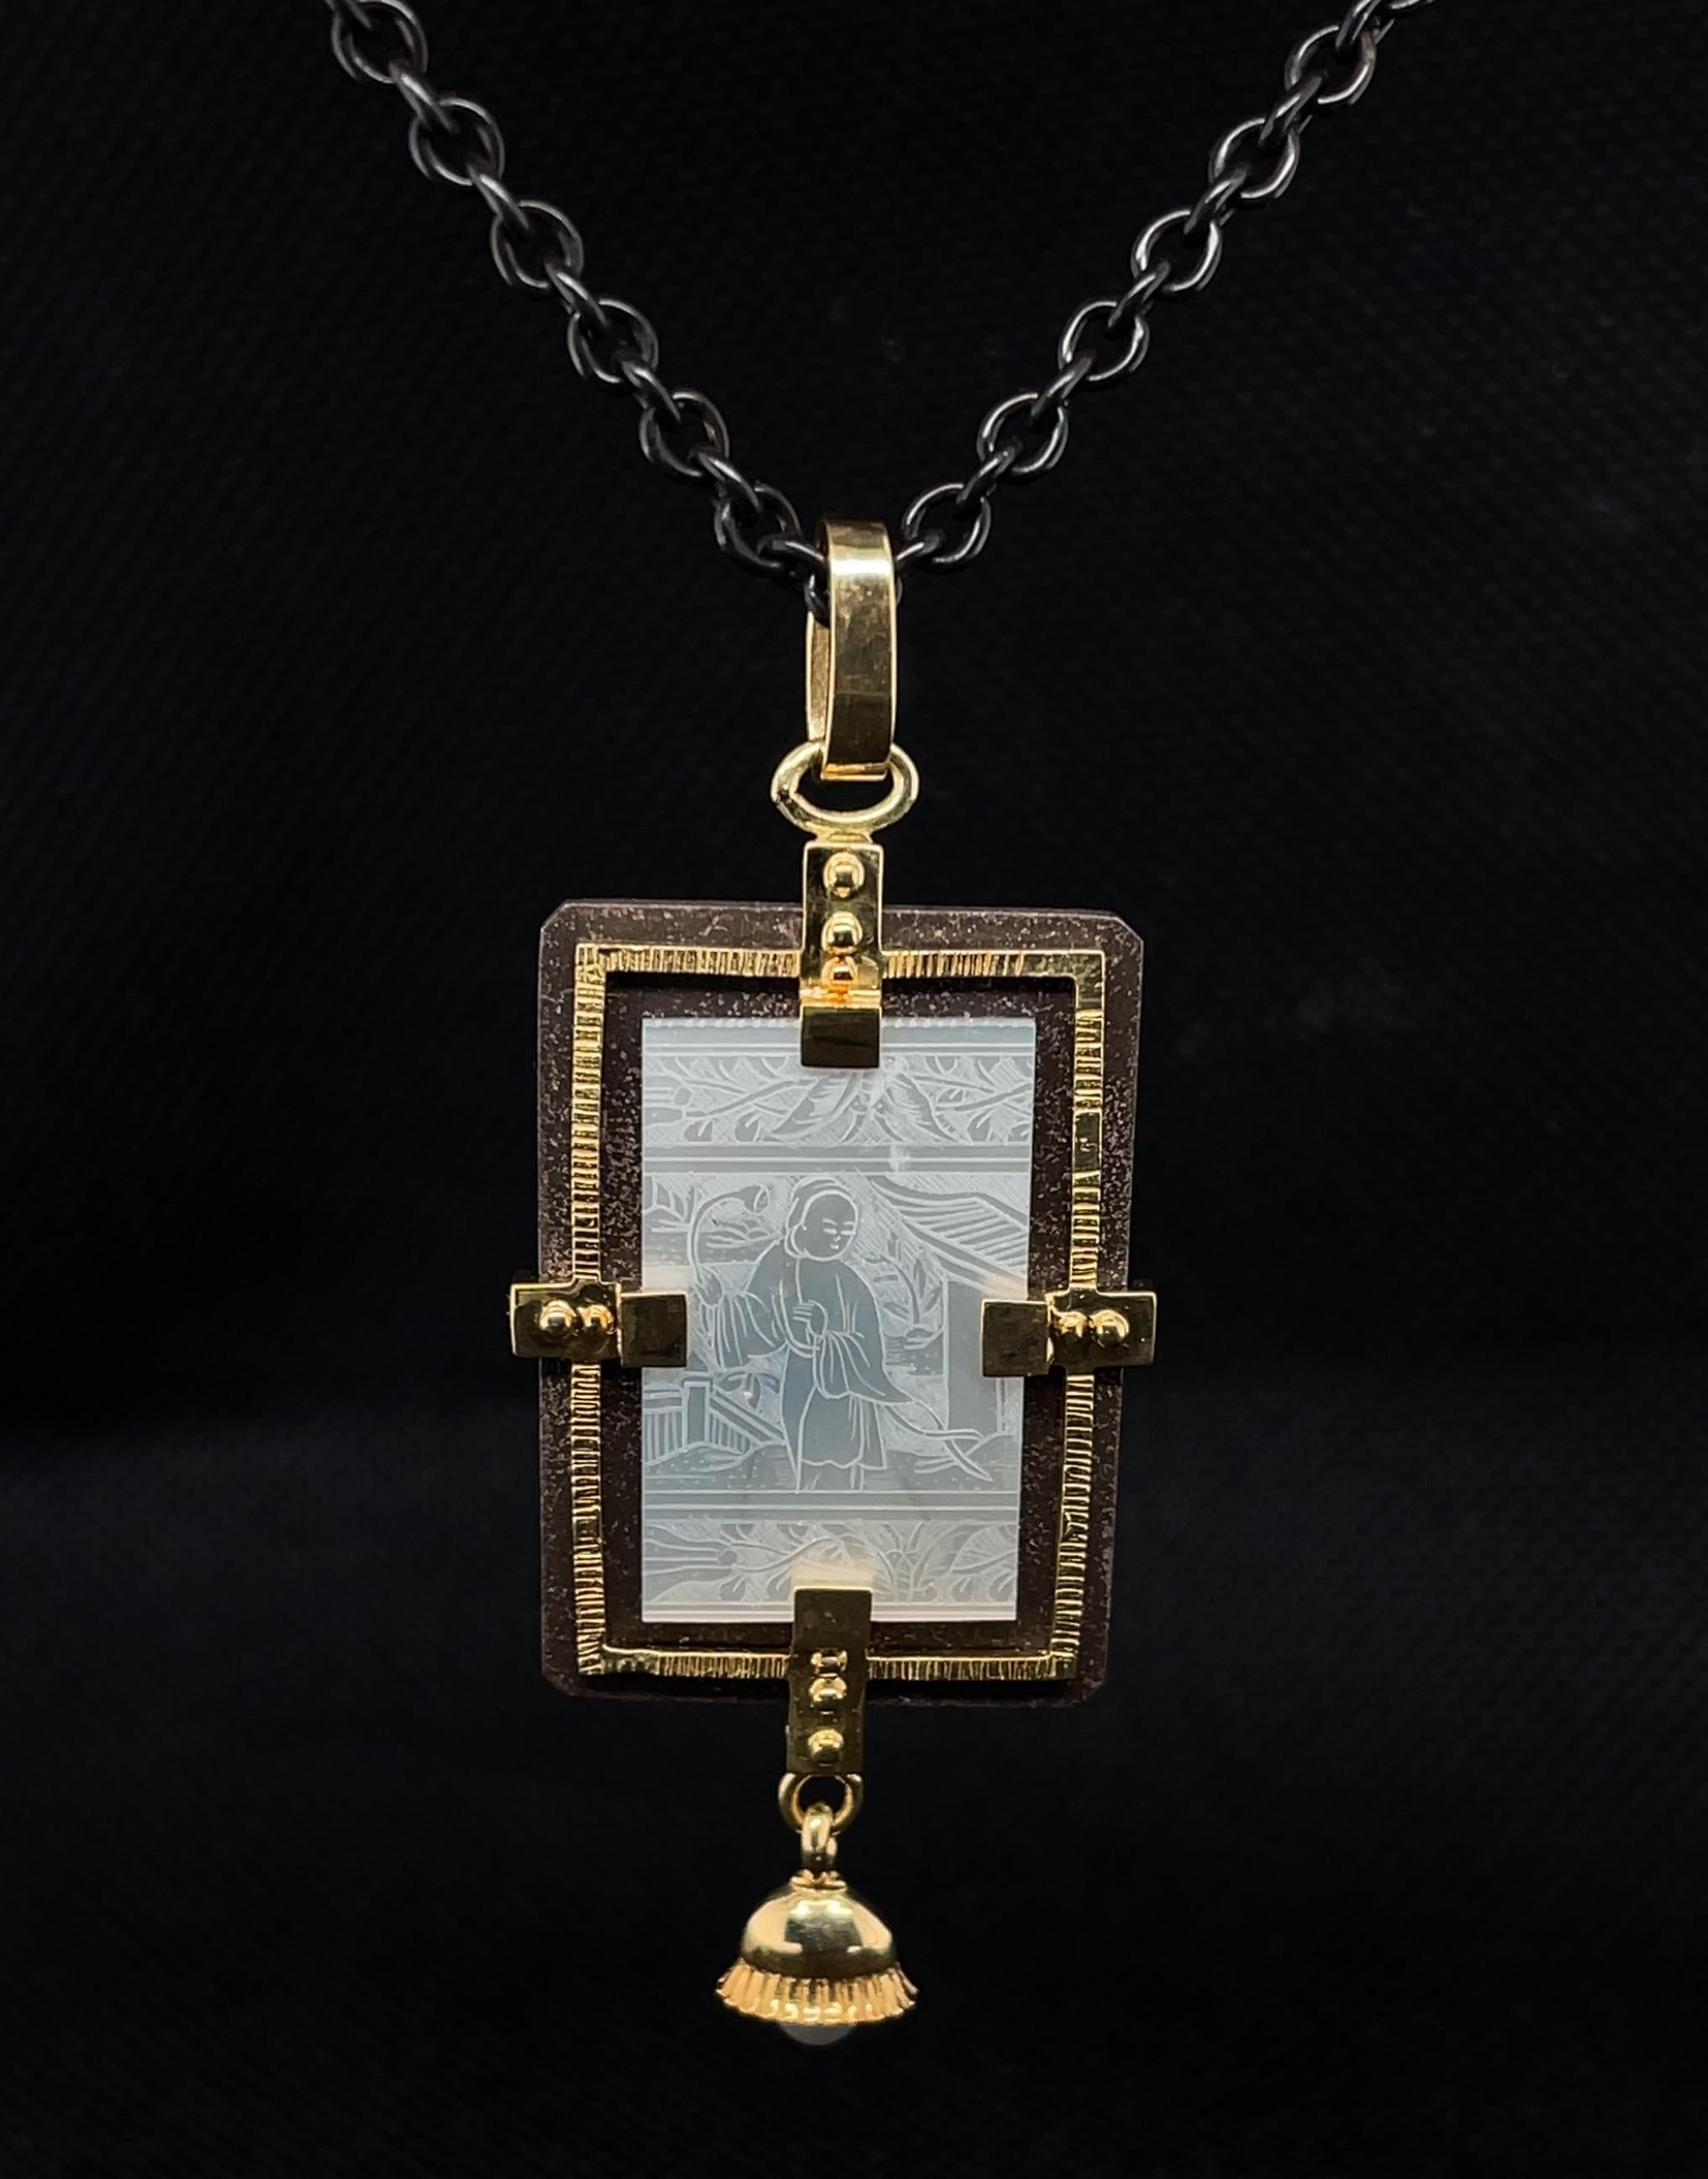 This striking necklace features an antique, mother-of-pearl Chinese gambling counter dating back to the 18th Century. The rectangular gaming counter is framed in rich 18k yellow gold and blackened silver, in an eye-catching design that looks